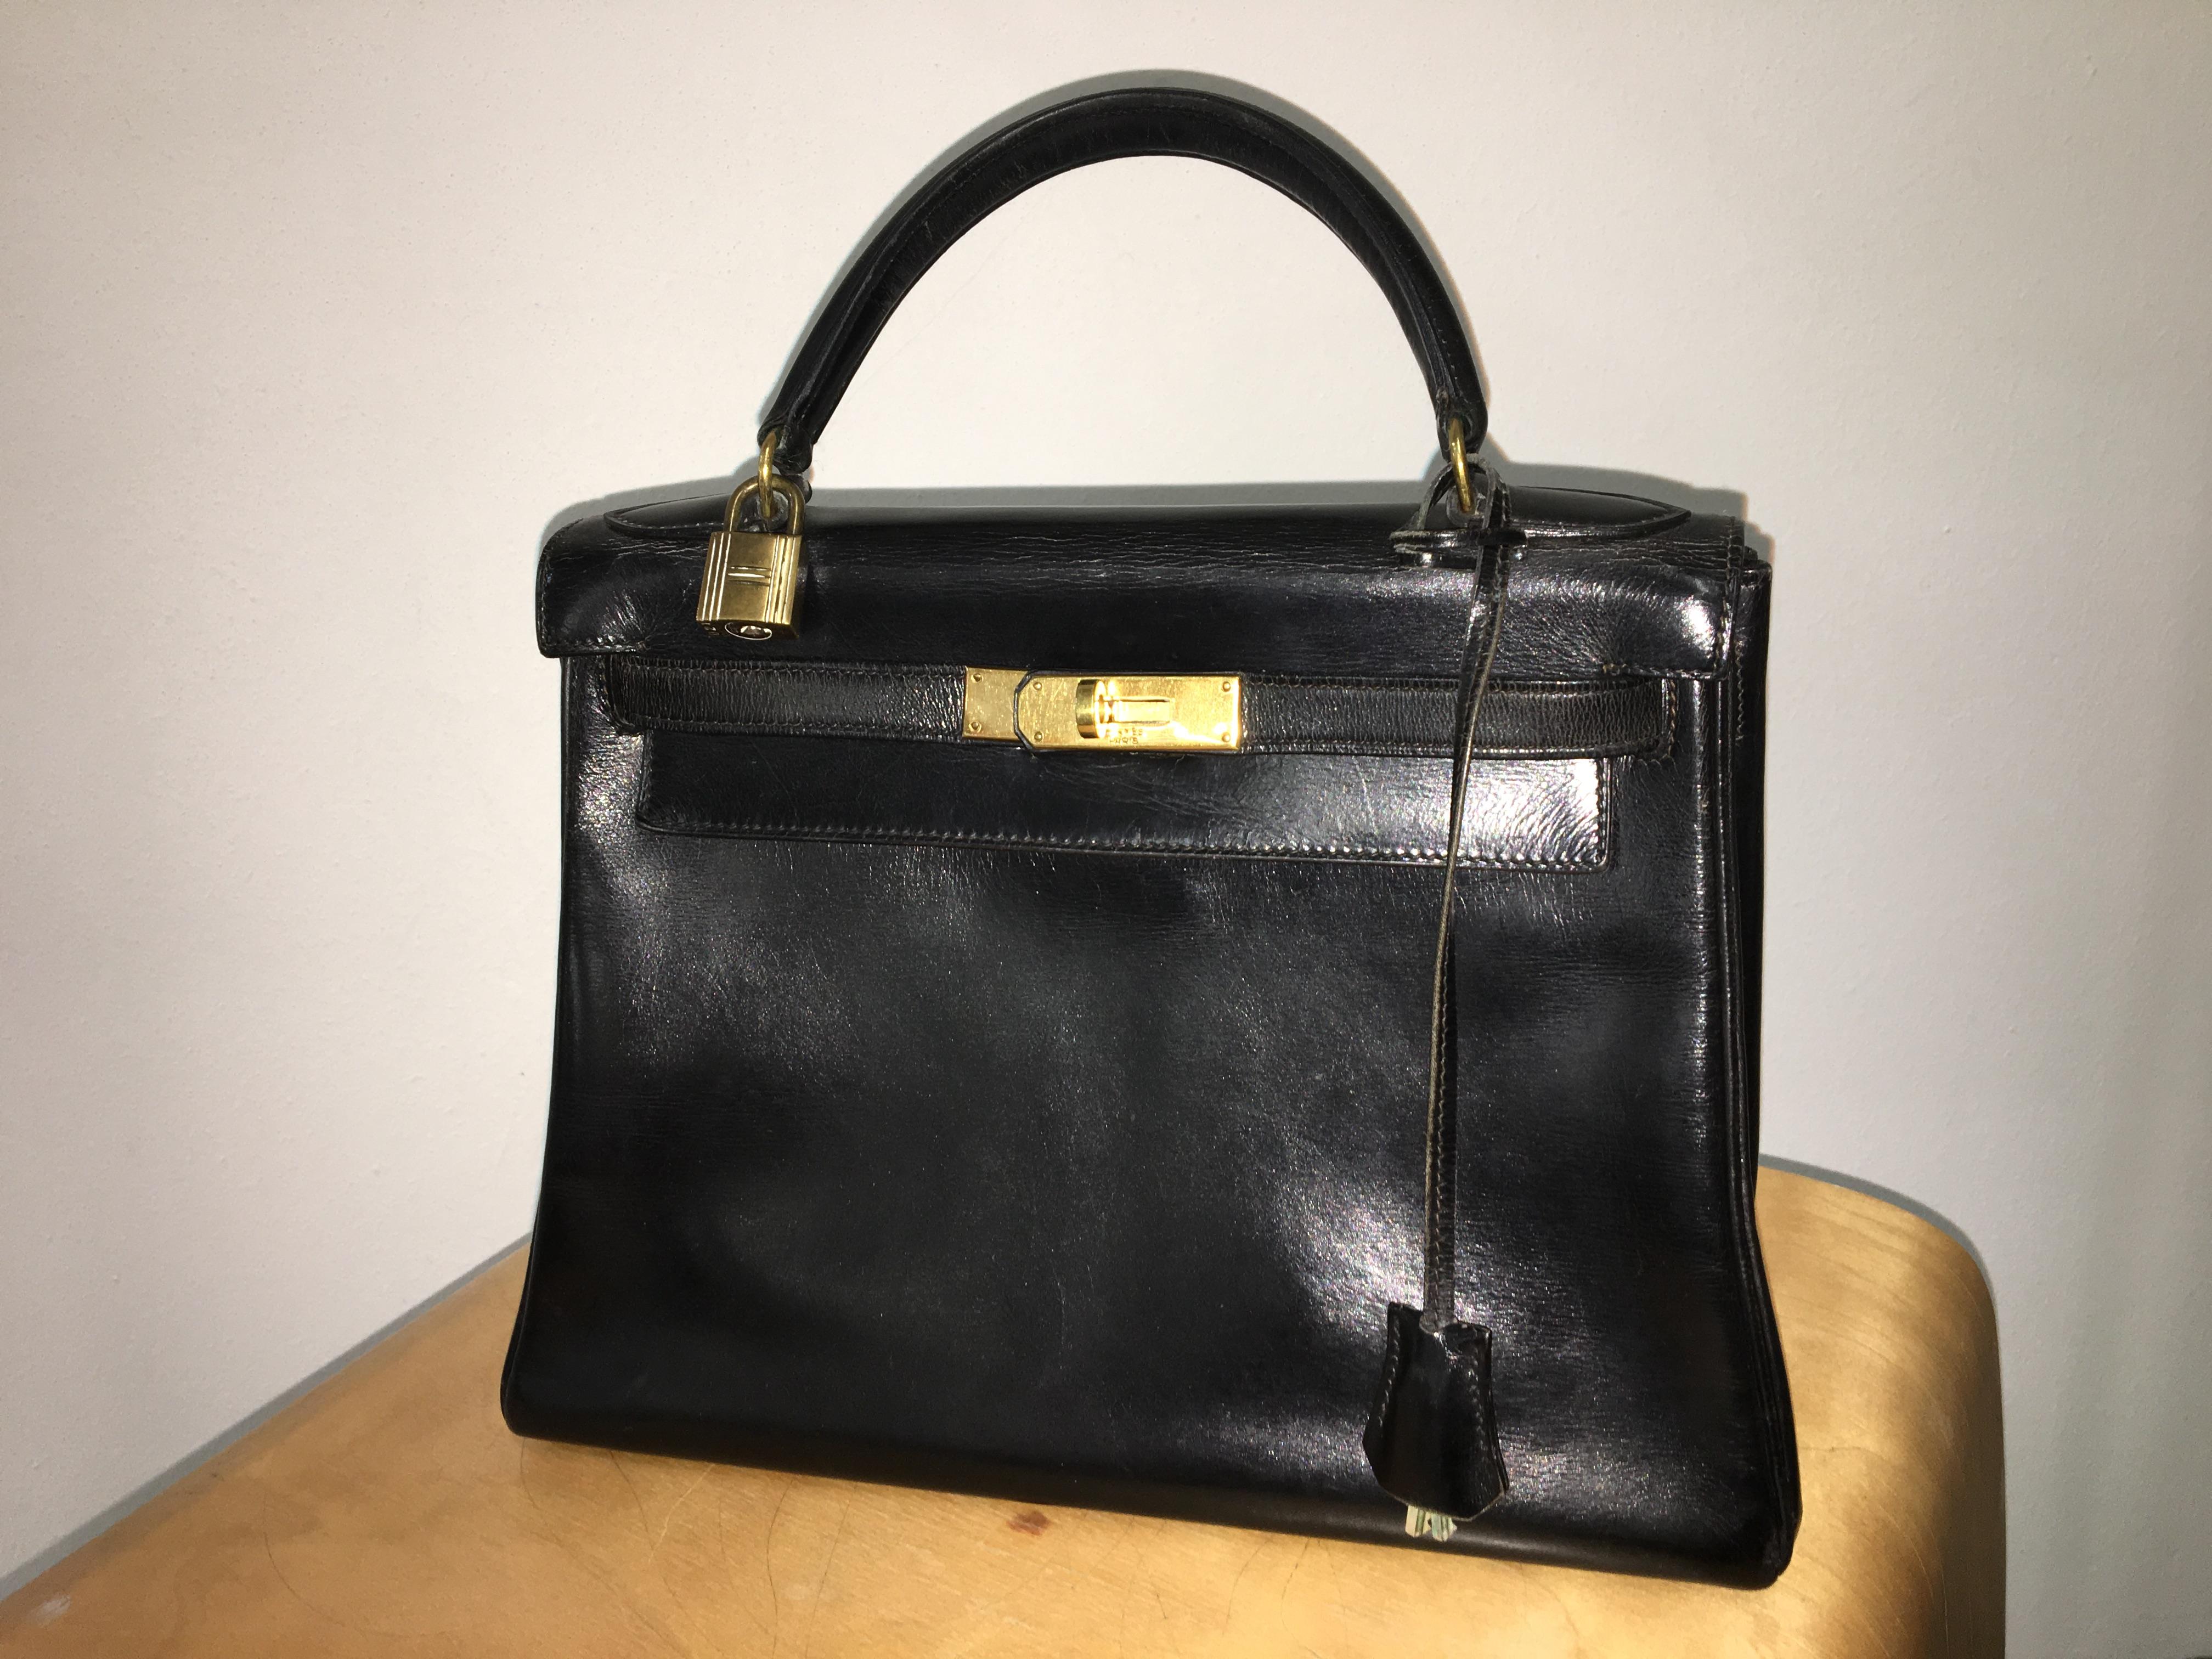 Vintage black leather Kelly bag. Featuring a trapeze body, top flap closure with twist-lock strap fastening, gold-tone hardware, front embossed logo stamp, a detachable leather clochette, lock and two keys, single structured leather top handle.